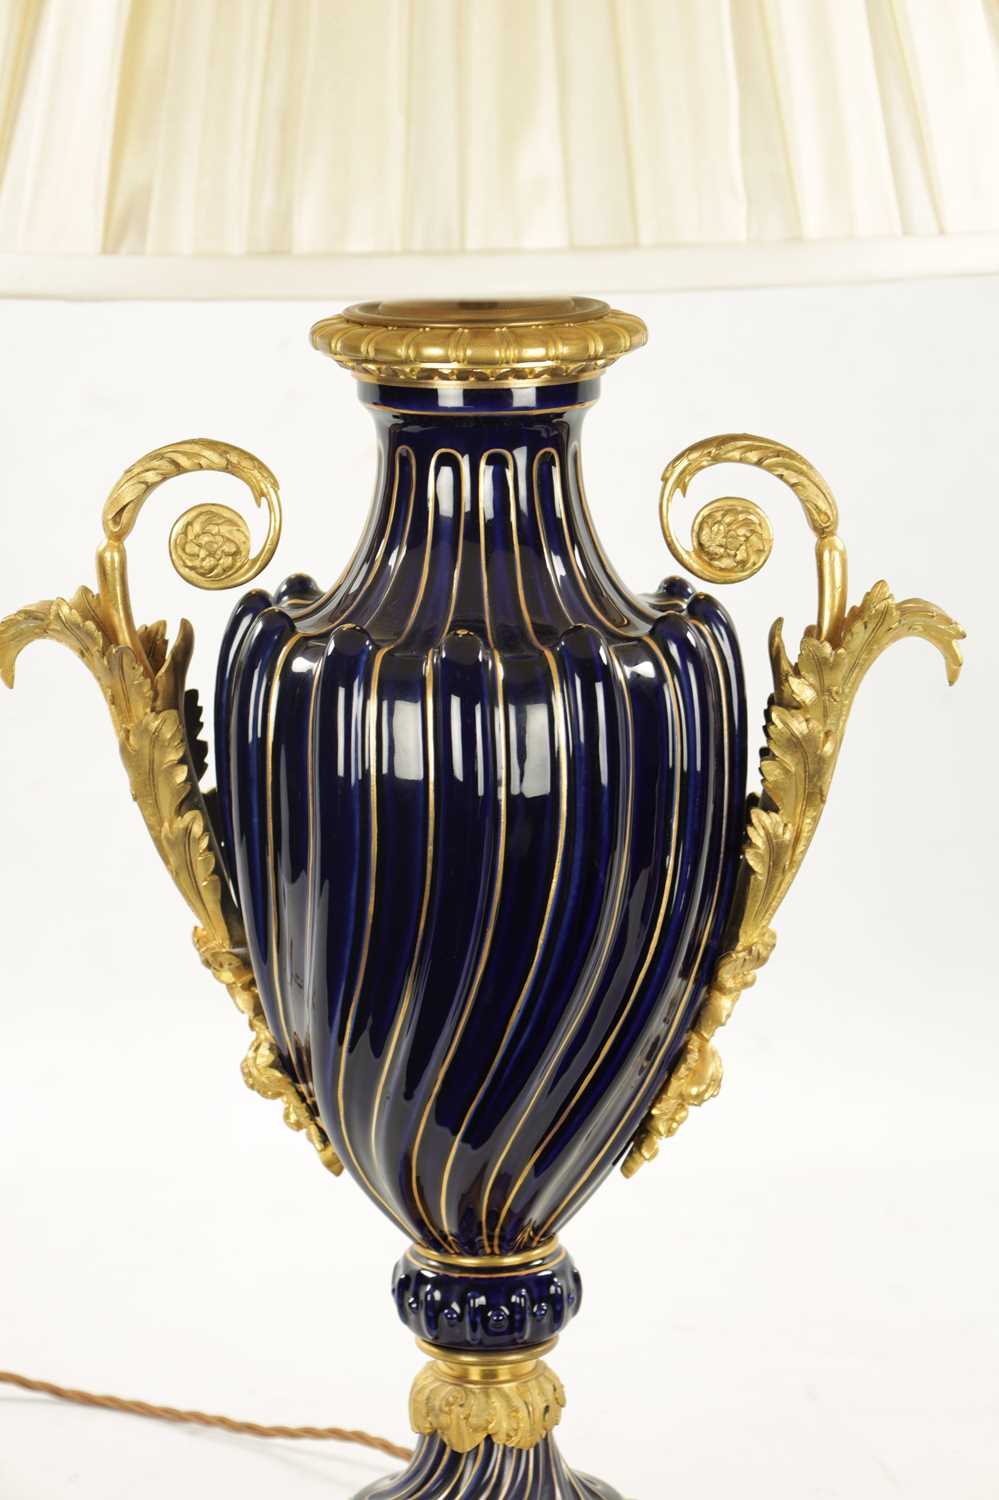 A LATE 19TH CENTURY ORMOLU AND SEVRES PORCELAIN VASE CONVERTED TO A LAMP - Image 4 of 5